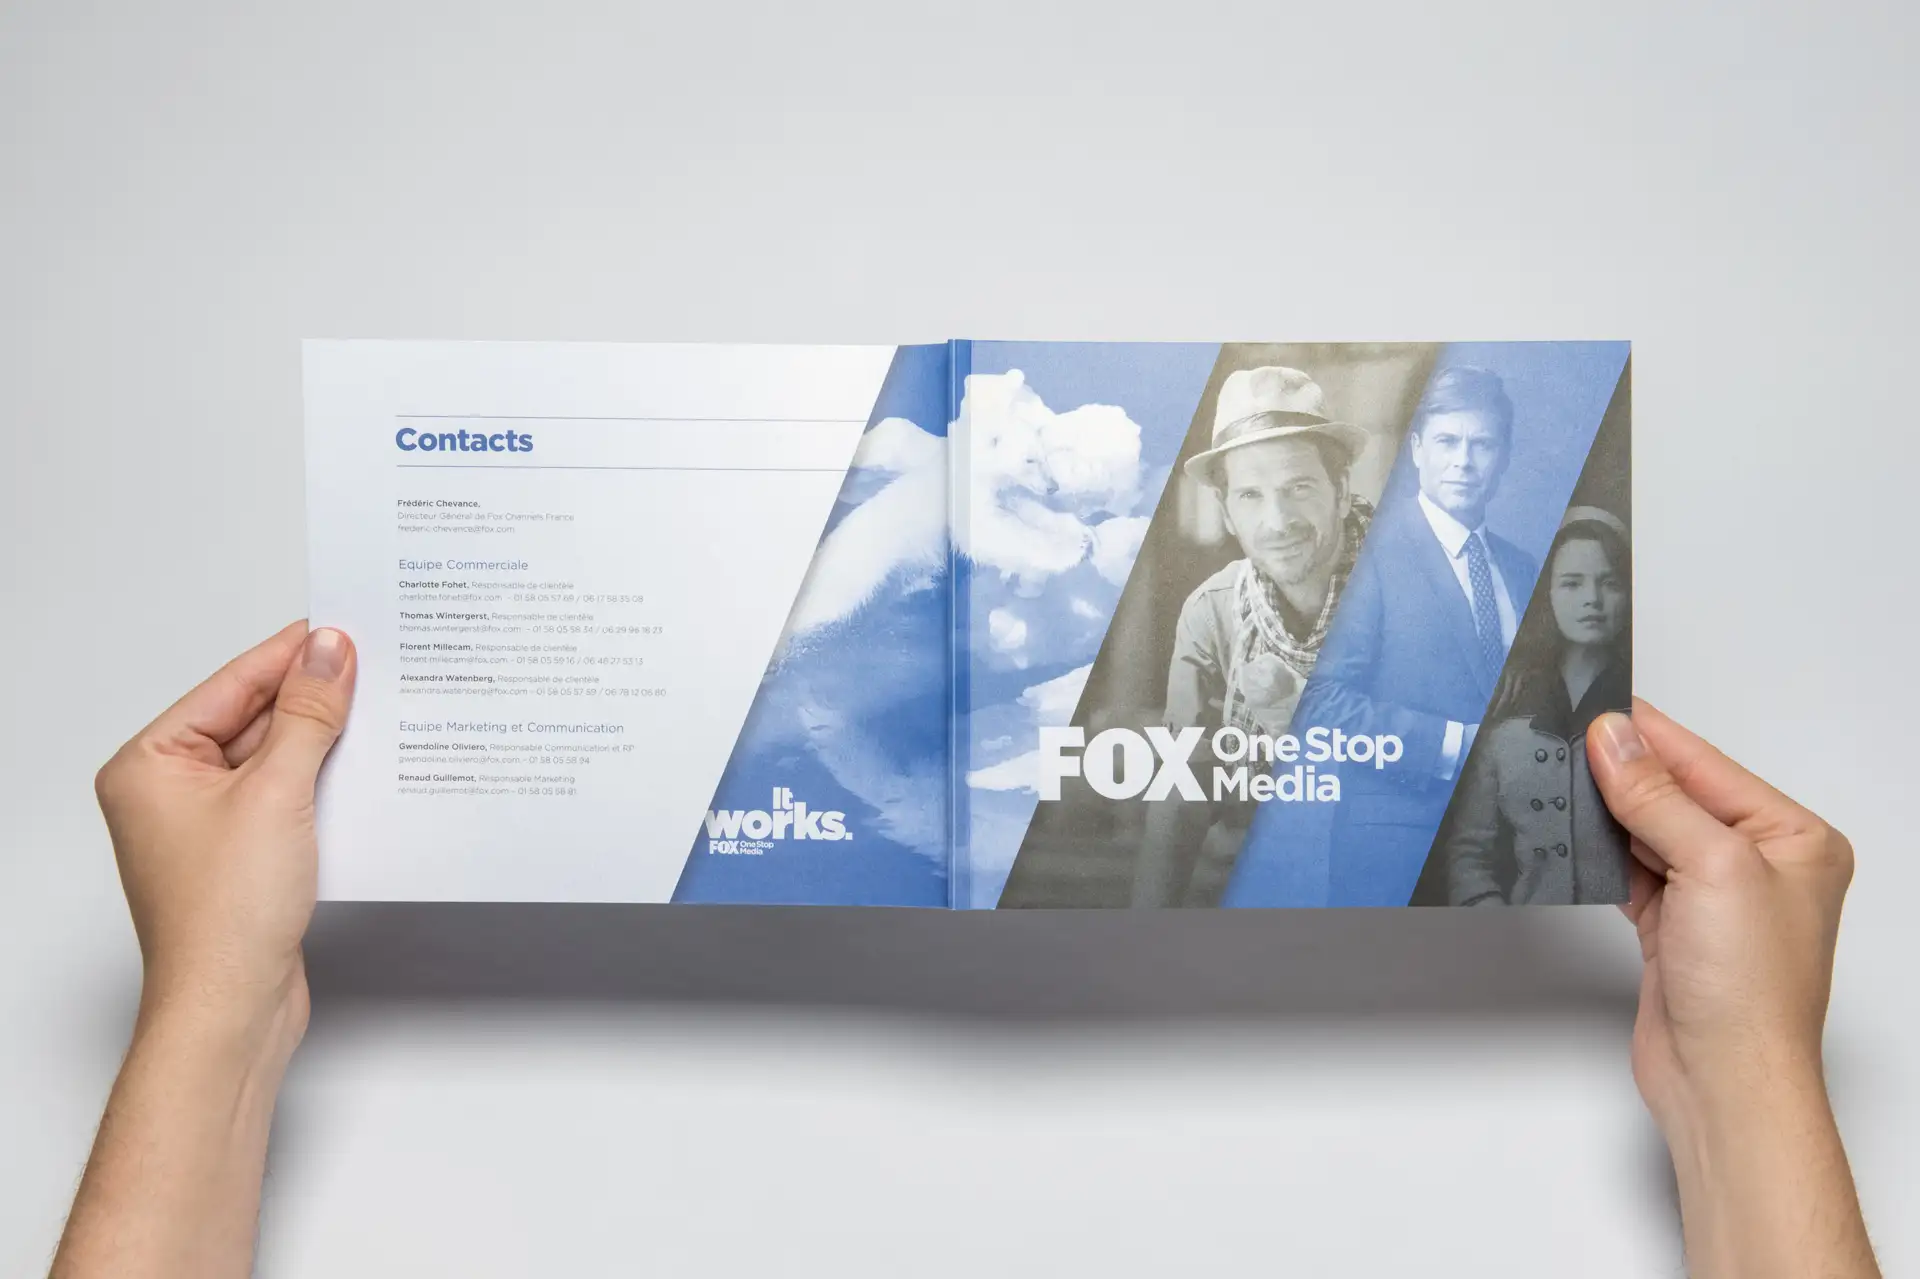 Image presenting the project Fox, One Stop Media